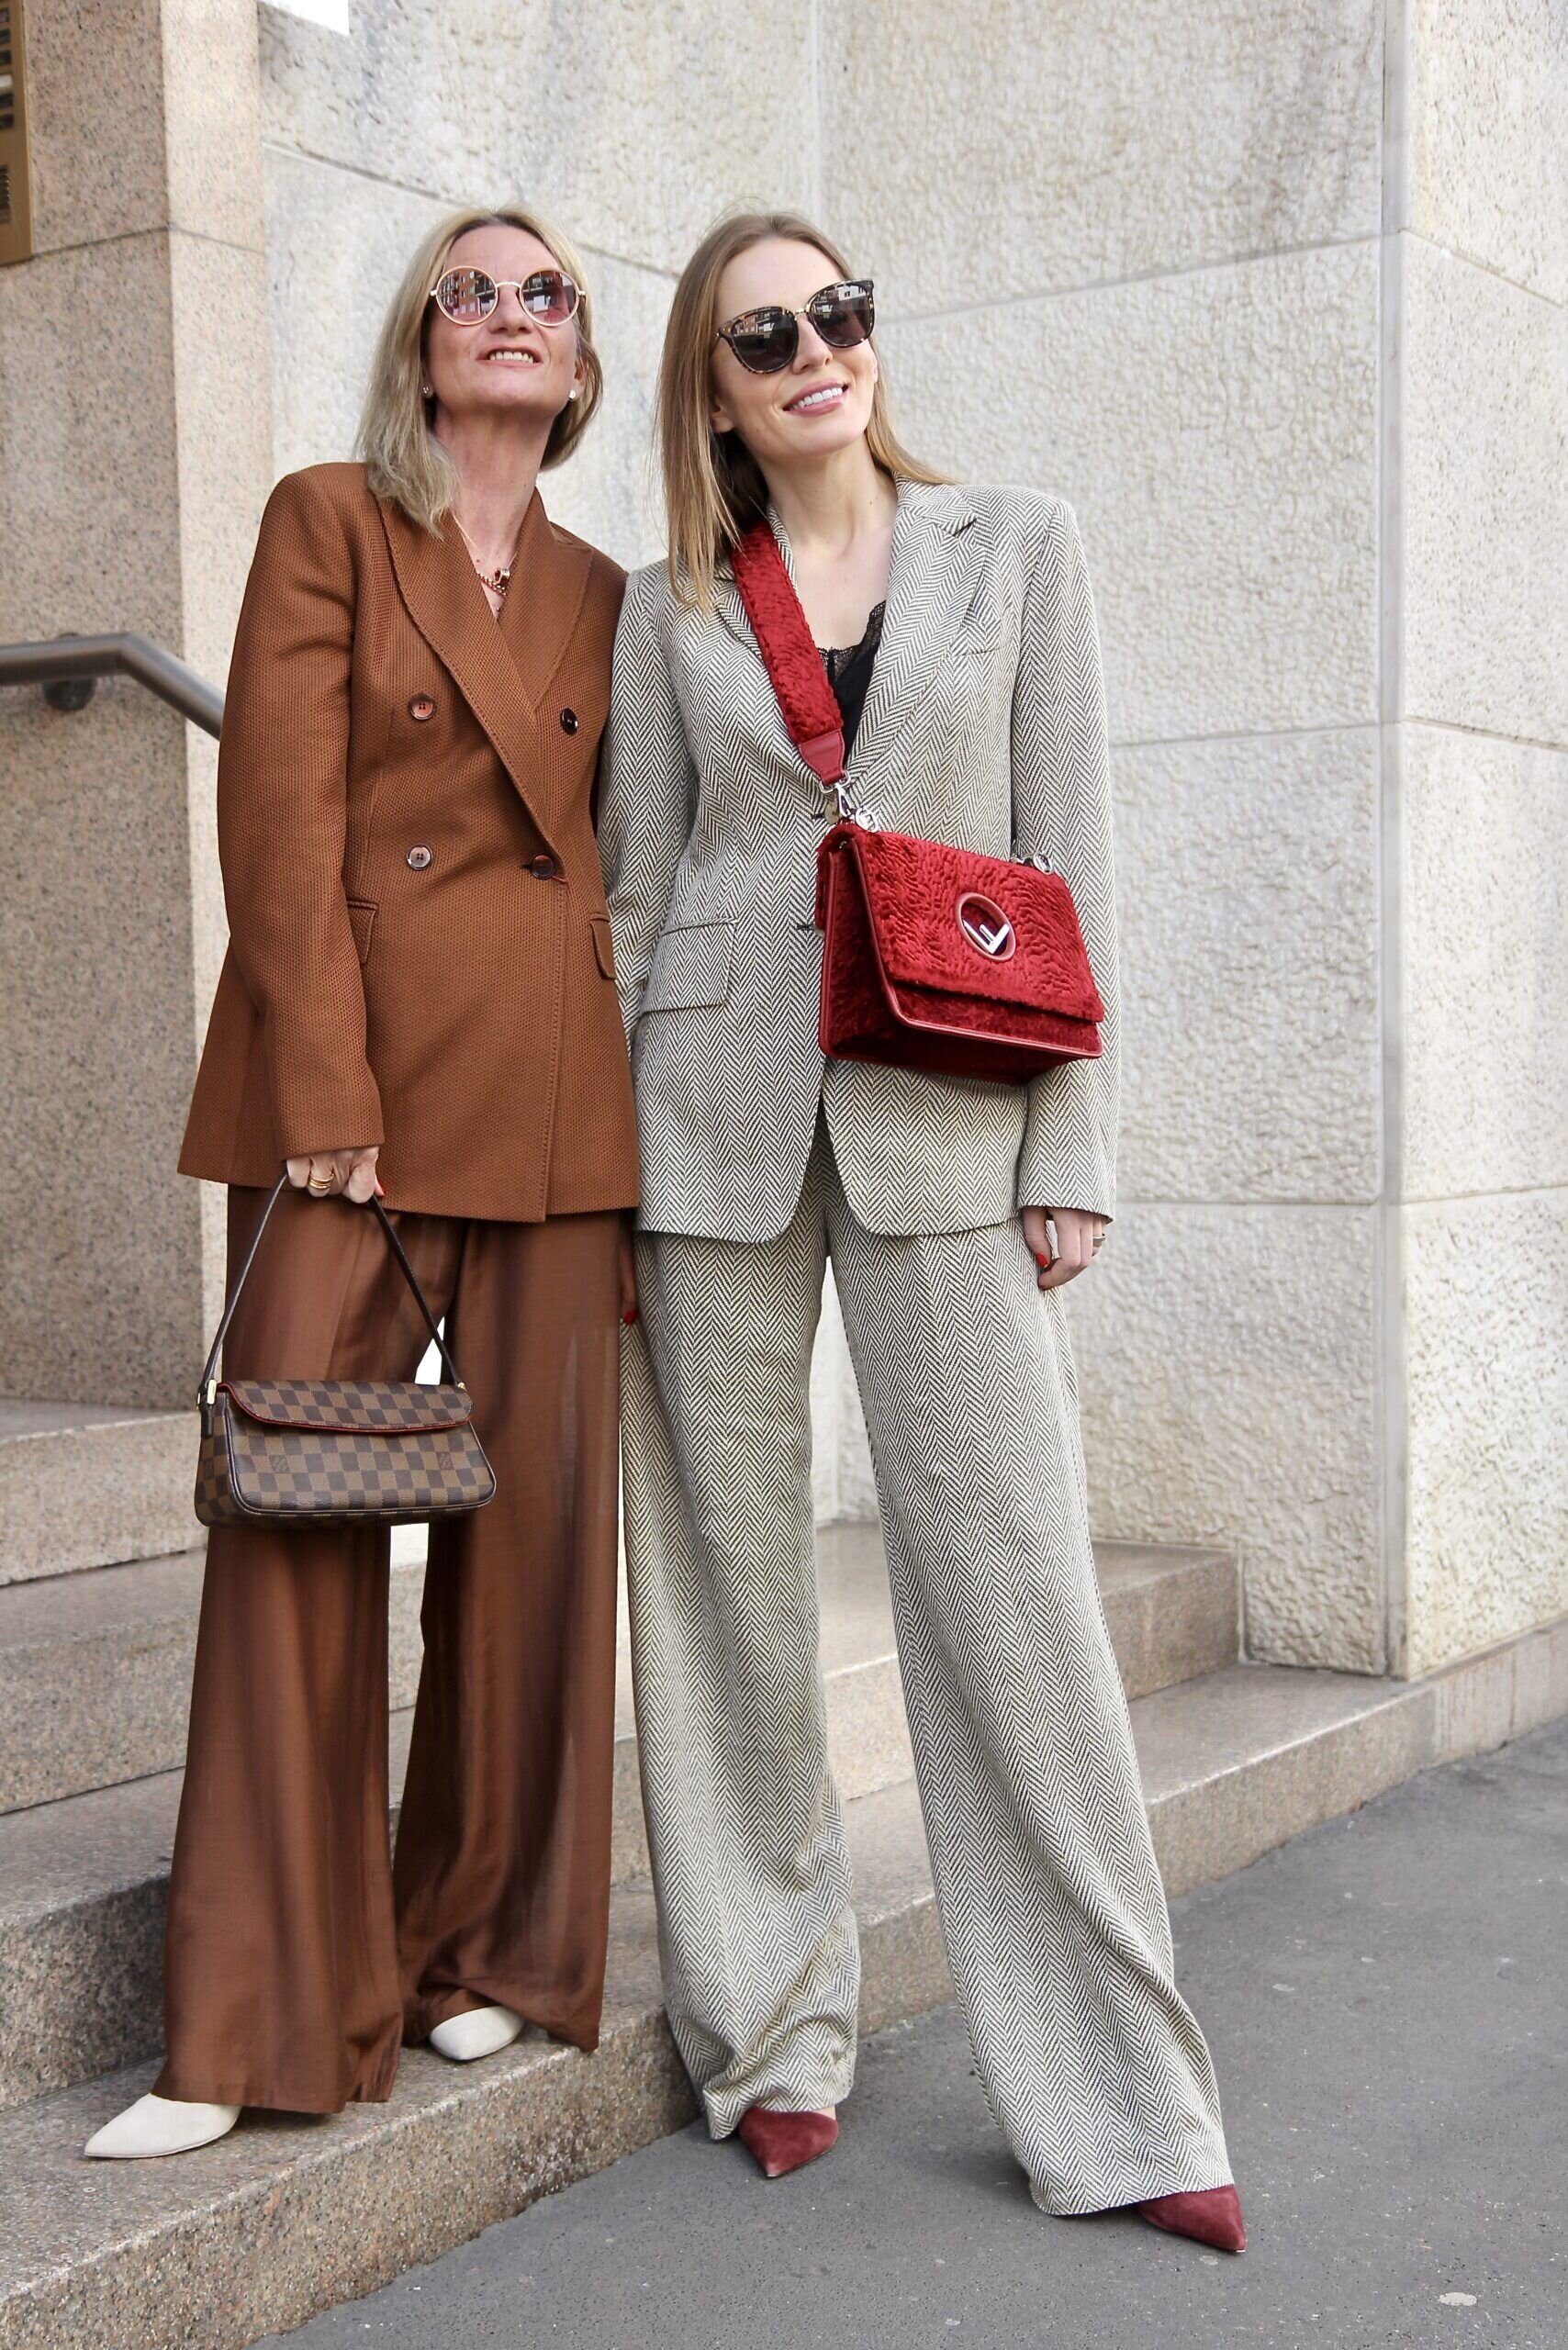 MaxMara - 3 Tricks to Wearing Spring's Hottest Trend the Oversized Suit - FunkyForty _ Funky Life style and Fashion.jpg